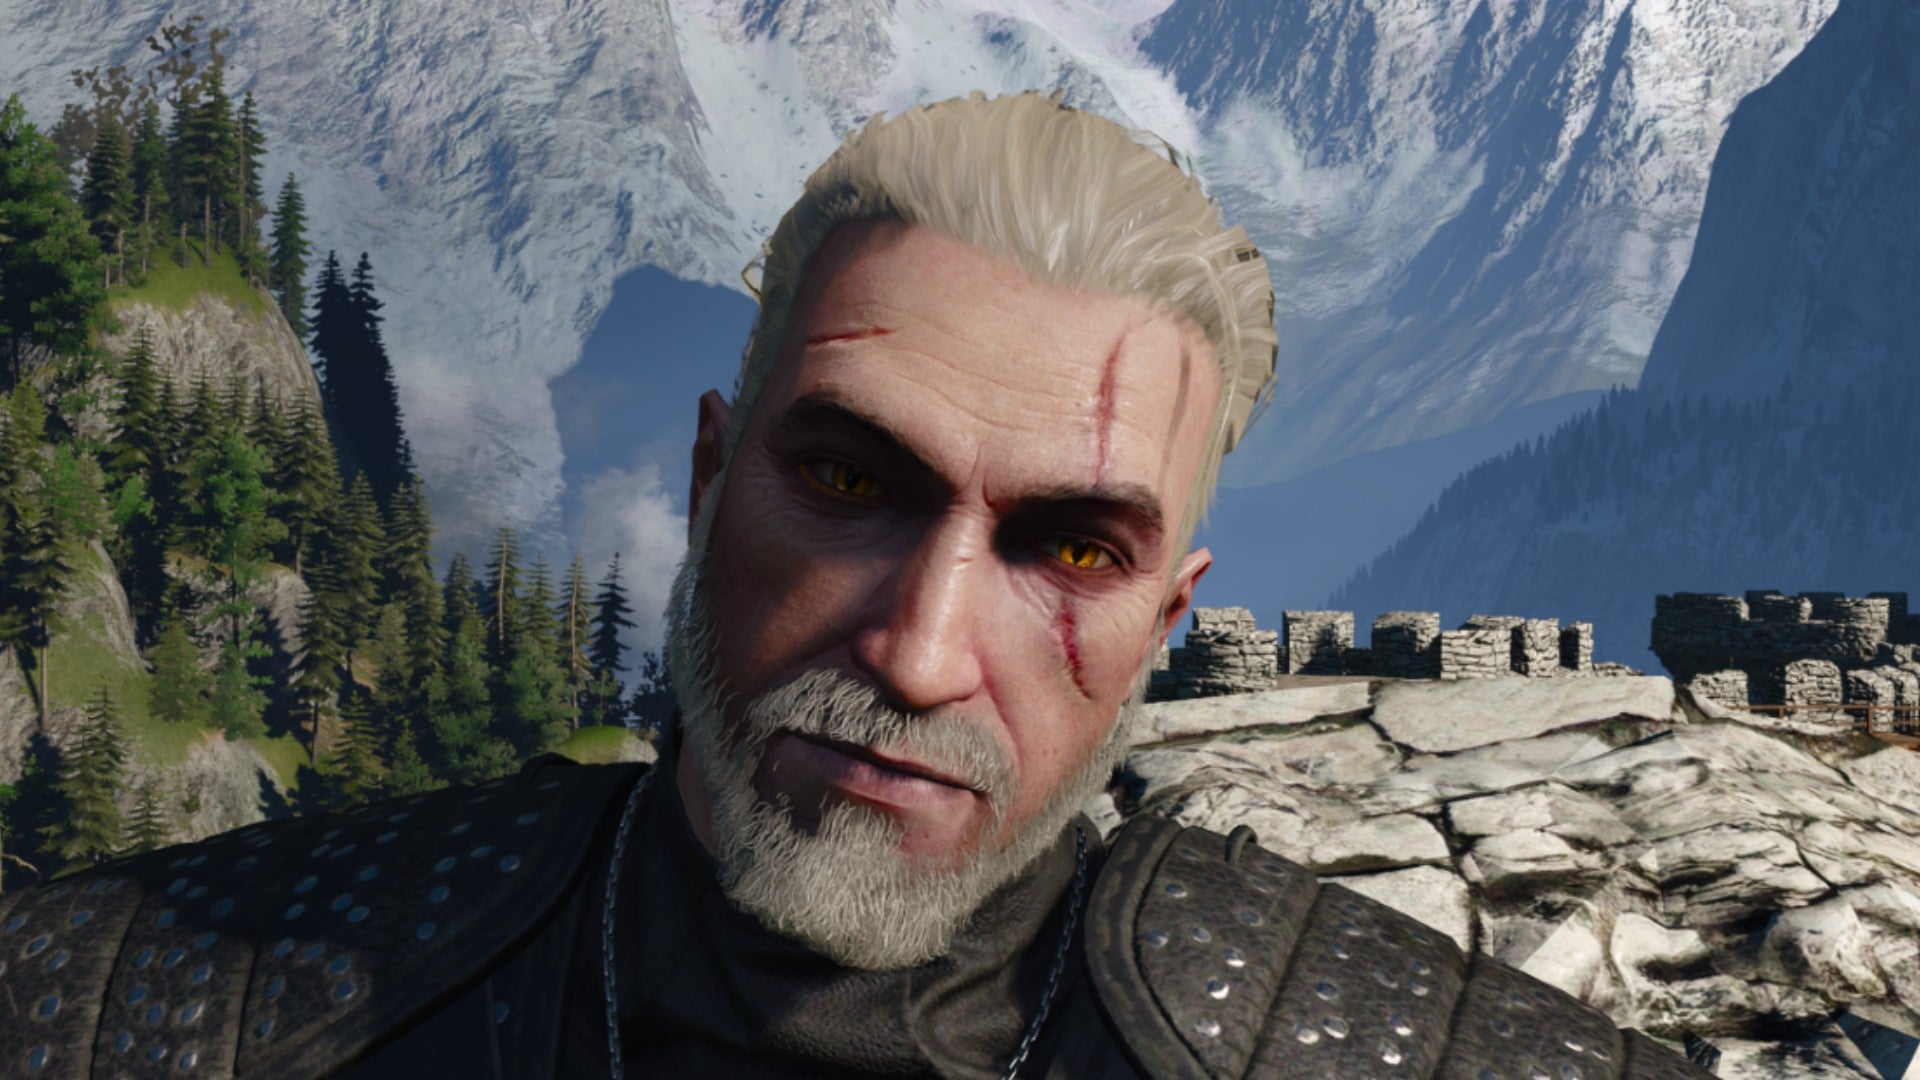 Witcher 3 screenshot showing Geralt's shaved with ponytail haircut from the front.